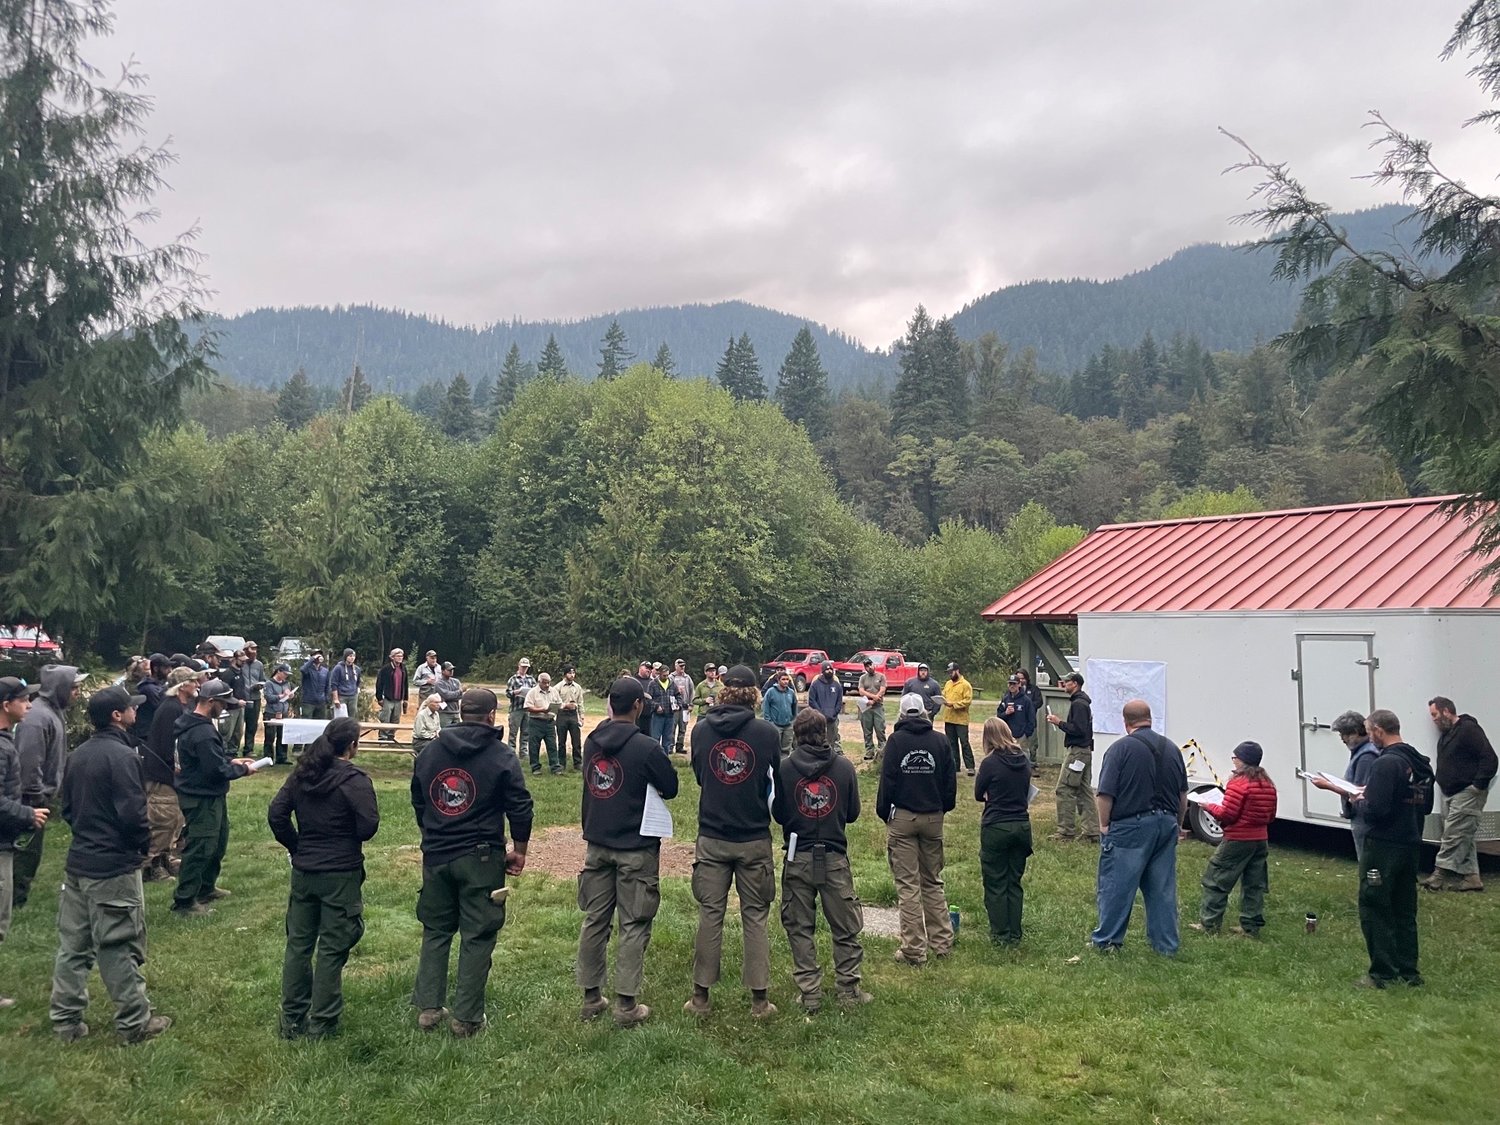 Firefighters working the Kalama fire in the Gifford Pinchot National Forest receive a briefing on Sept. 14.